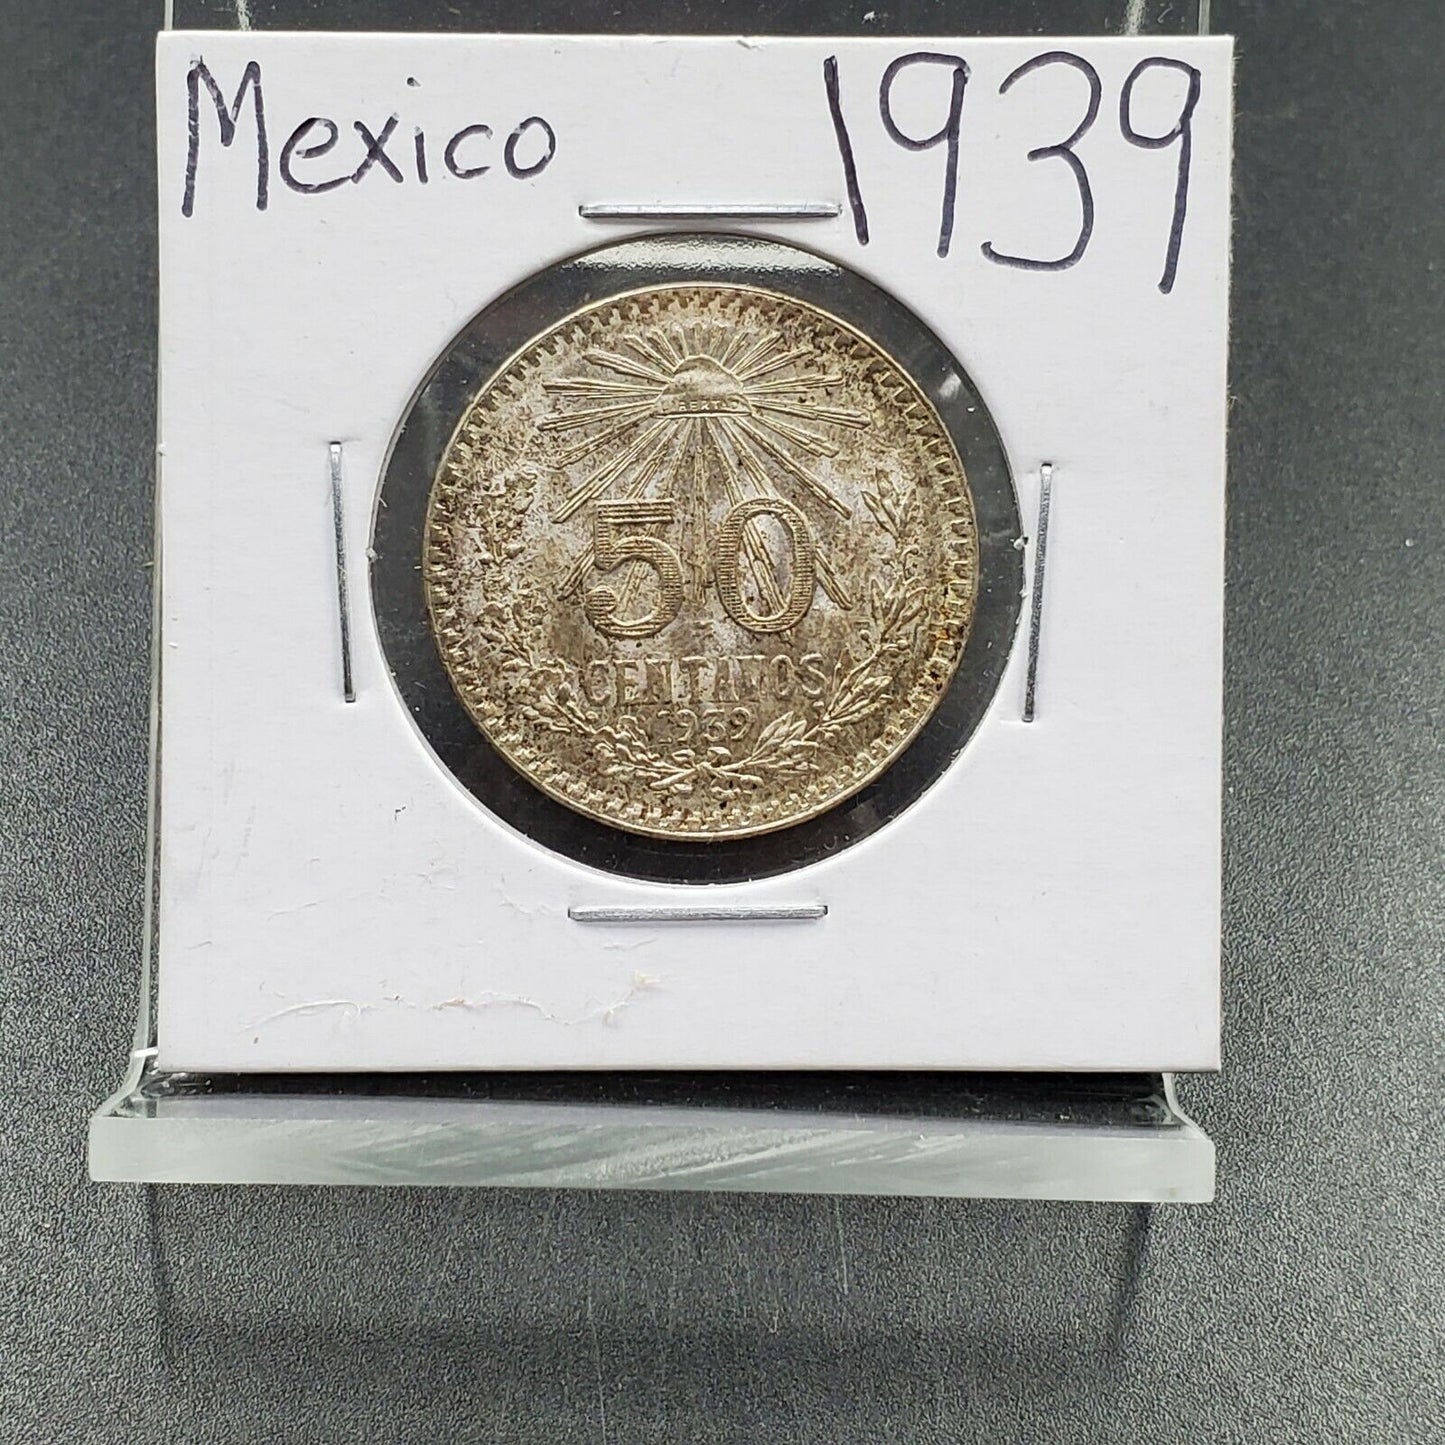 1939 Mexico 50c Fifty Centavos Silver Coin GEM BU Uncirculated Nice Toning